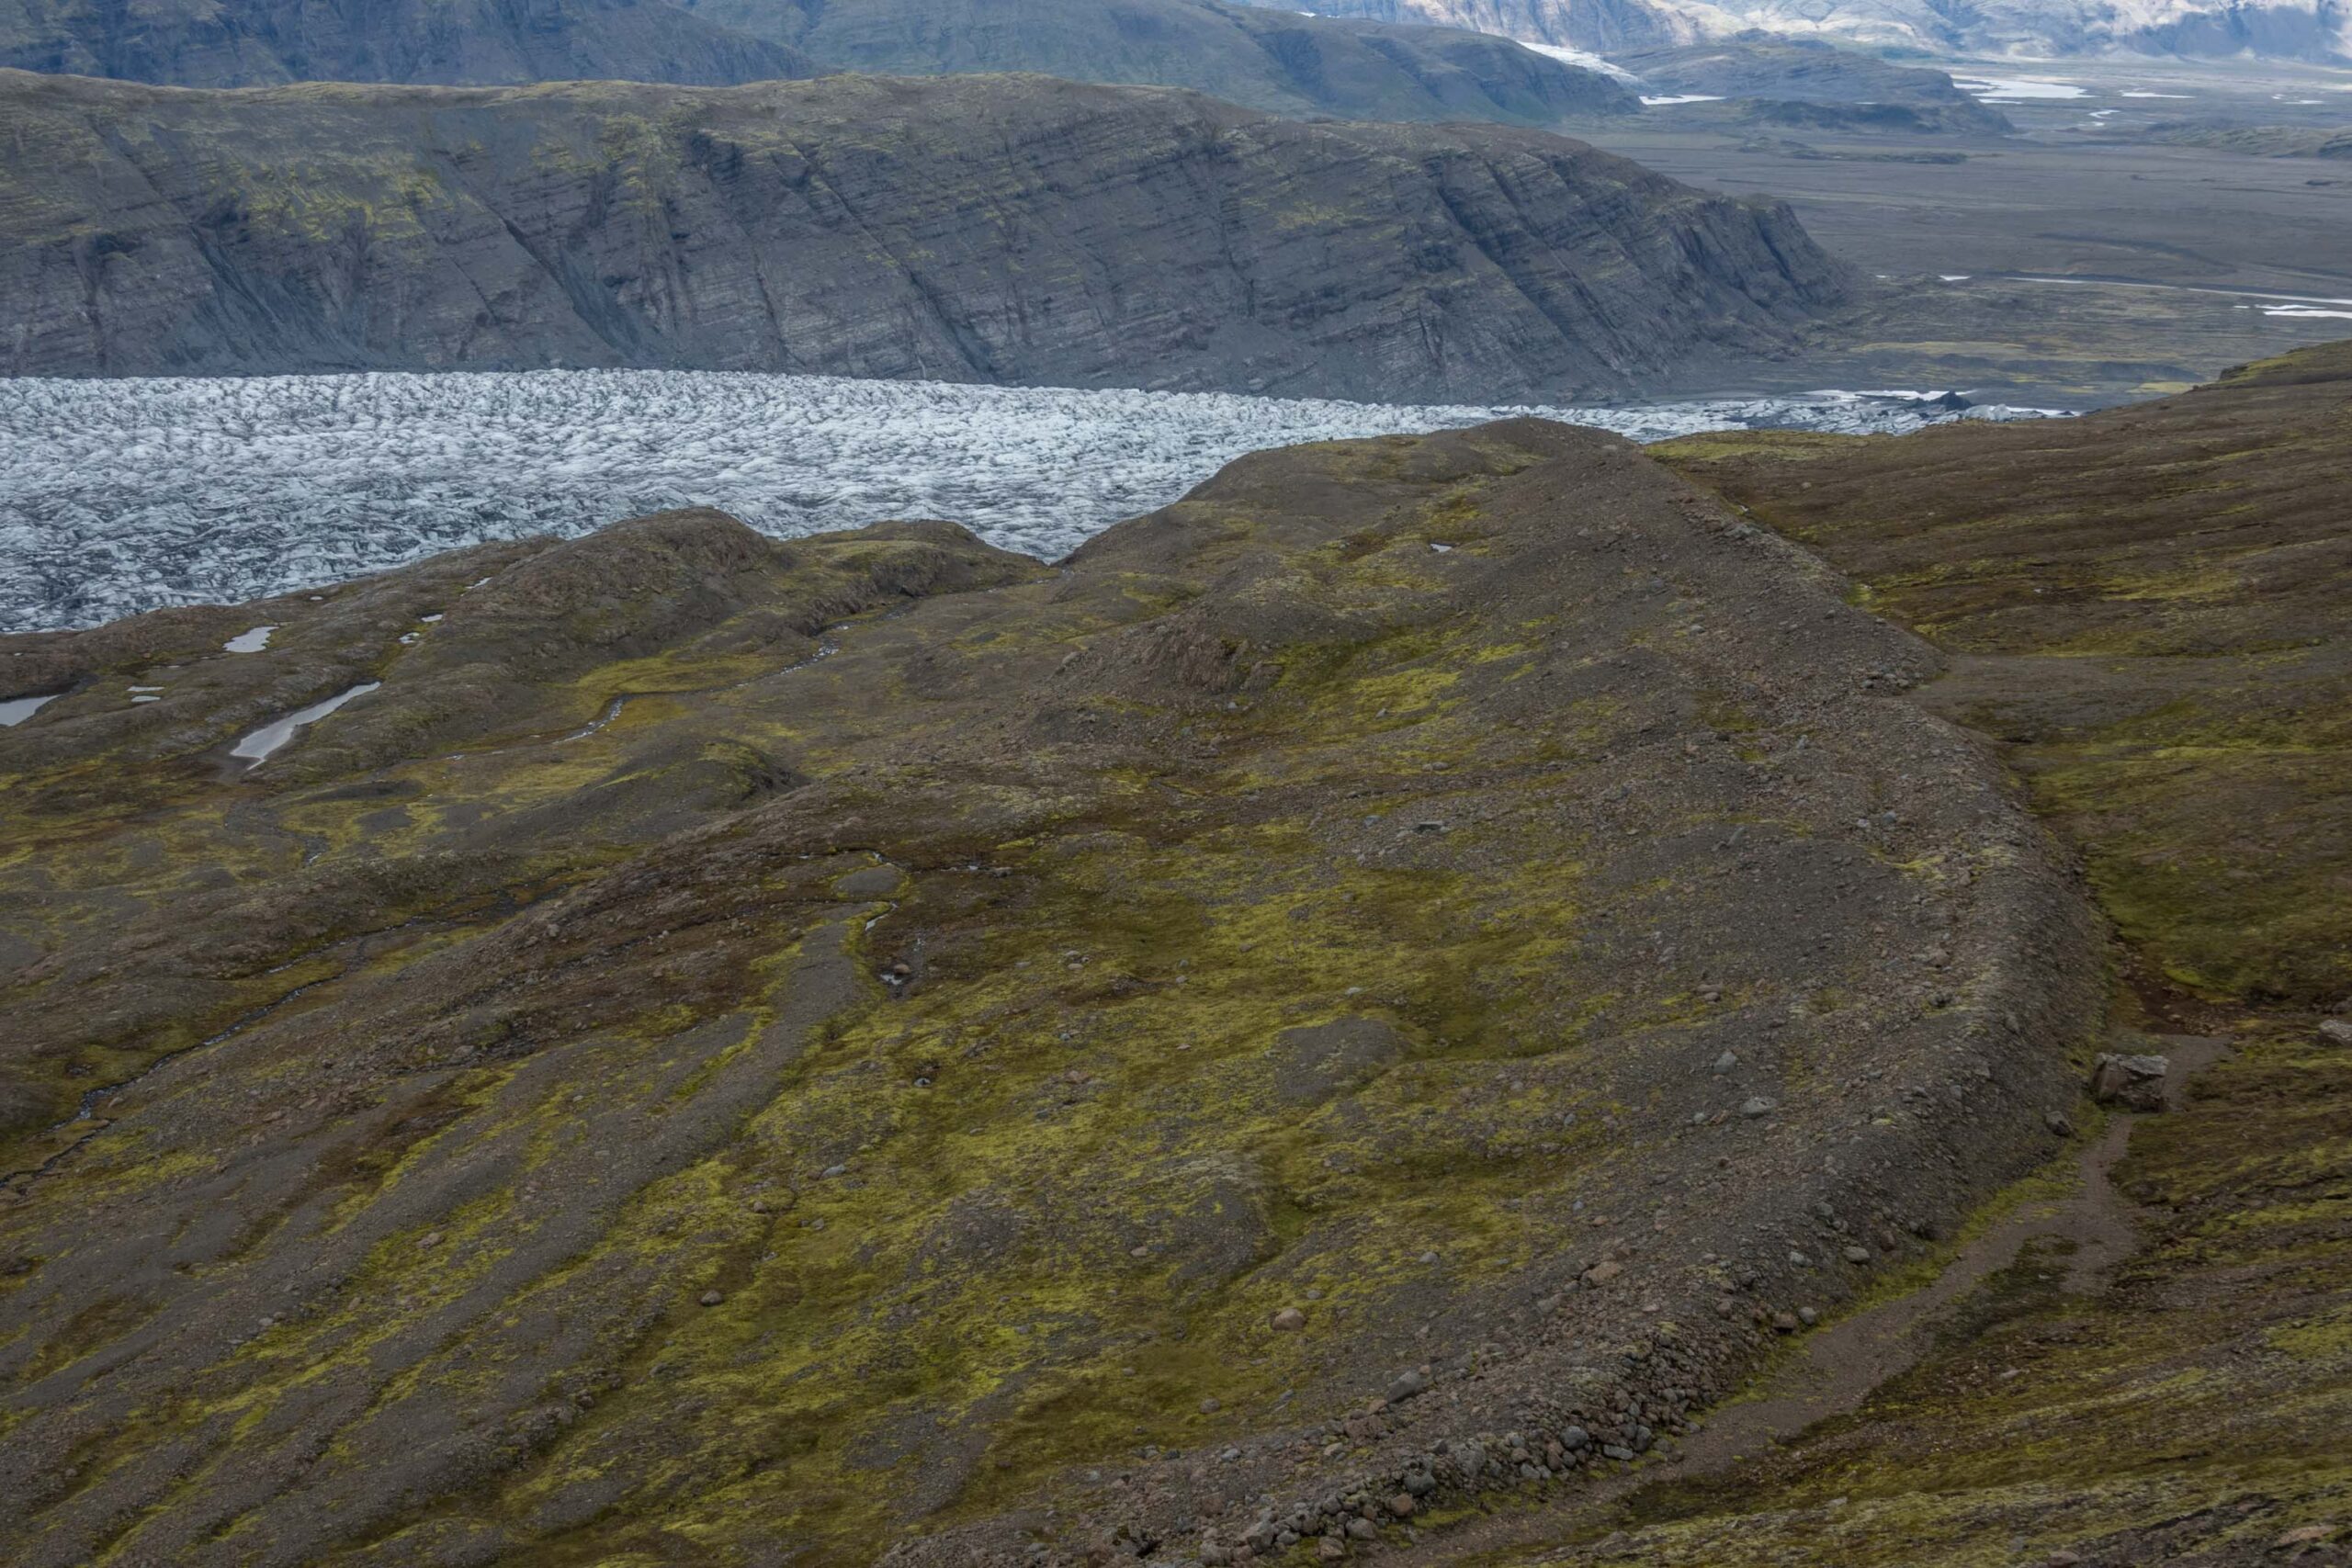 Outermost lateral moraine to the south of Skálafellsjökull, dating from ca. 1890.